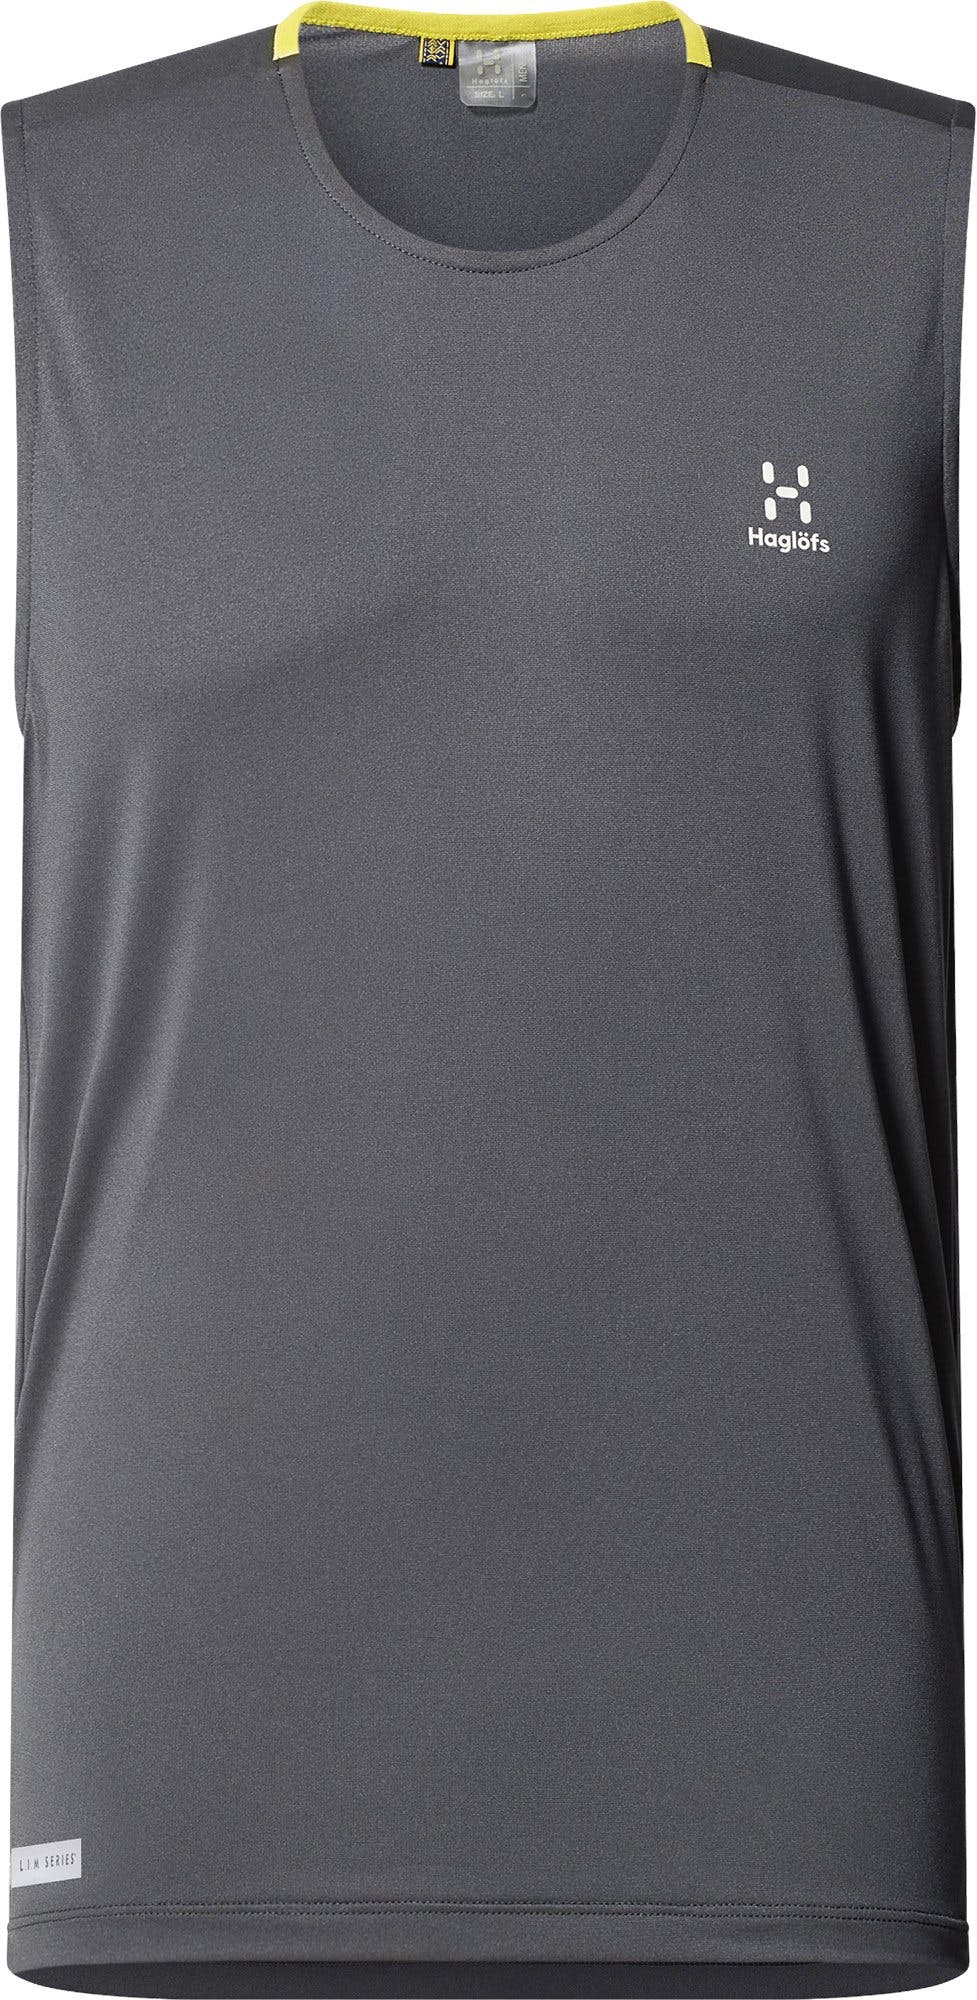 Product image for L.I.M Tempo Trail Tank Top - Men's